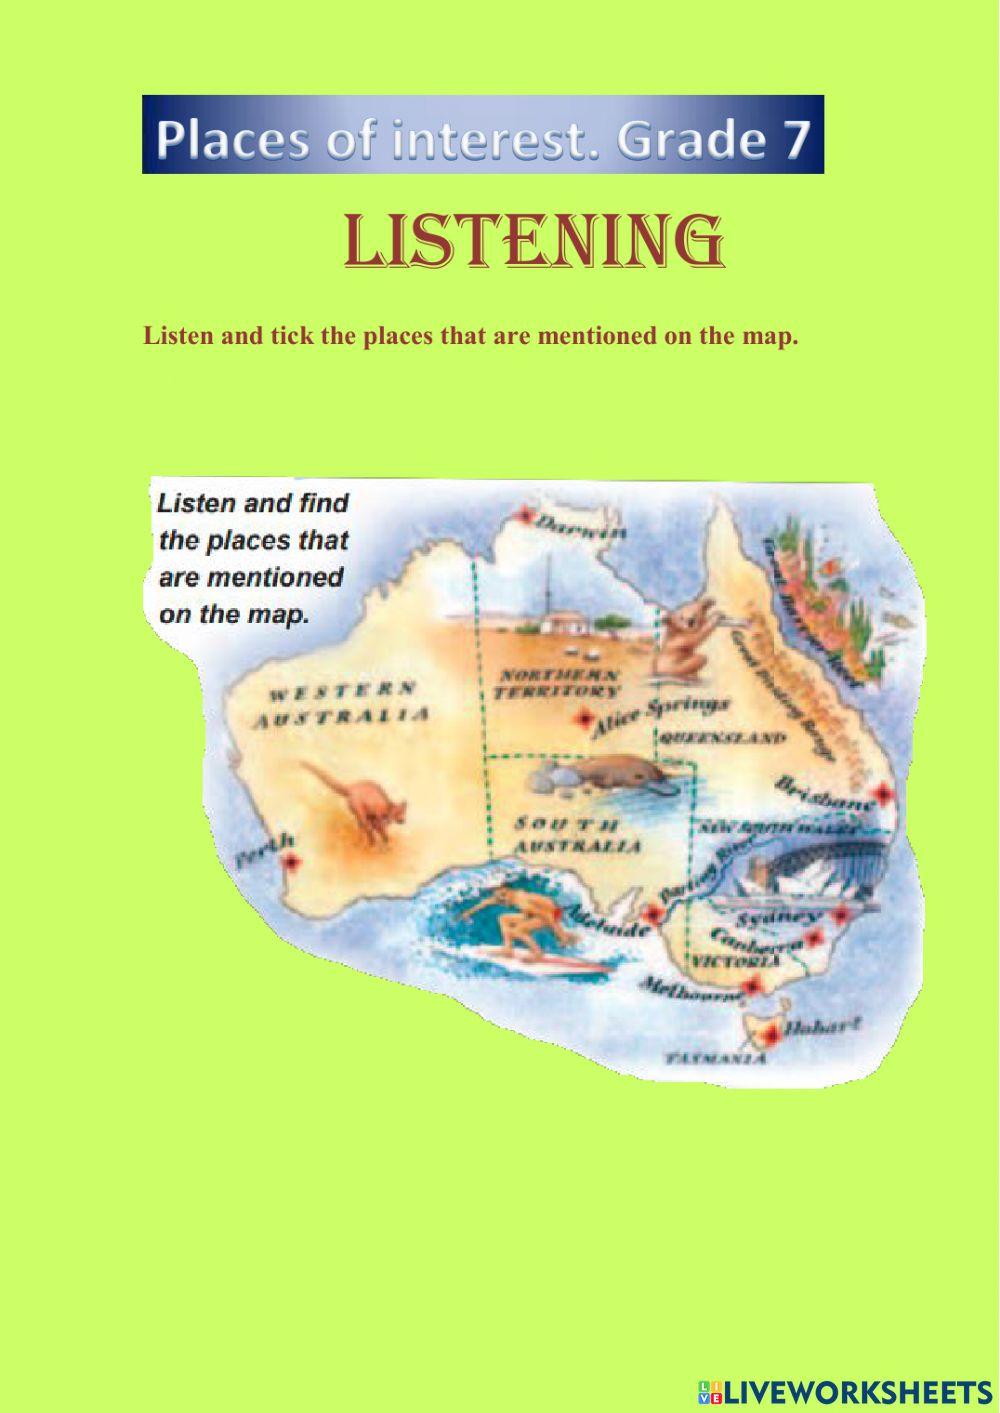 Listening. Places of interest